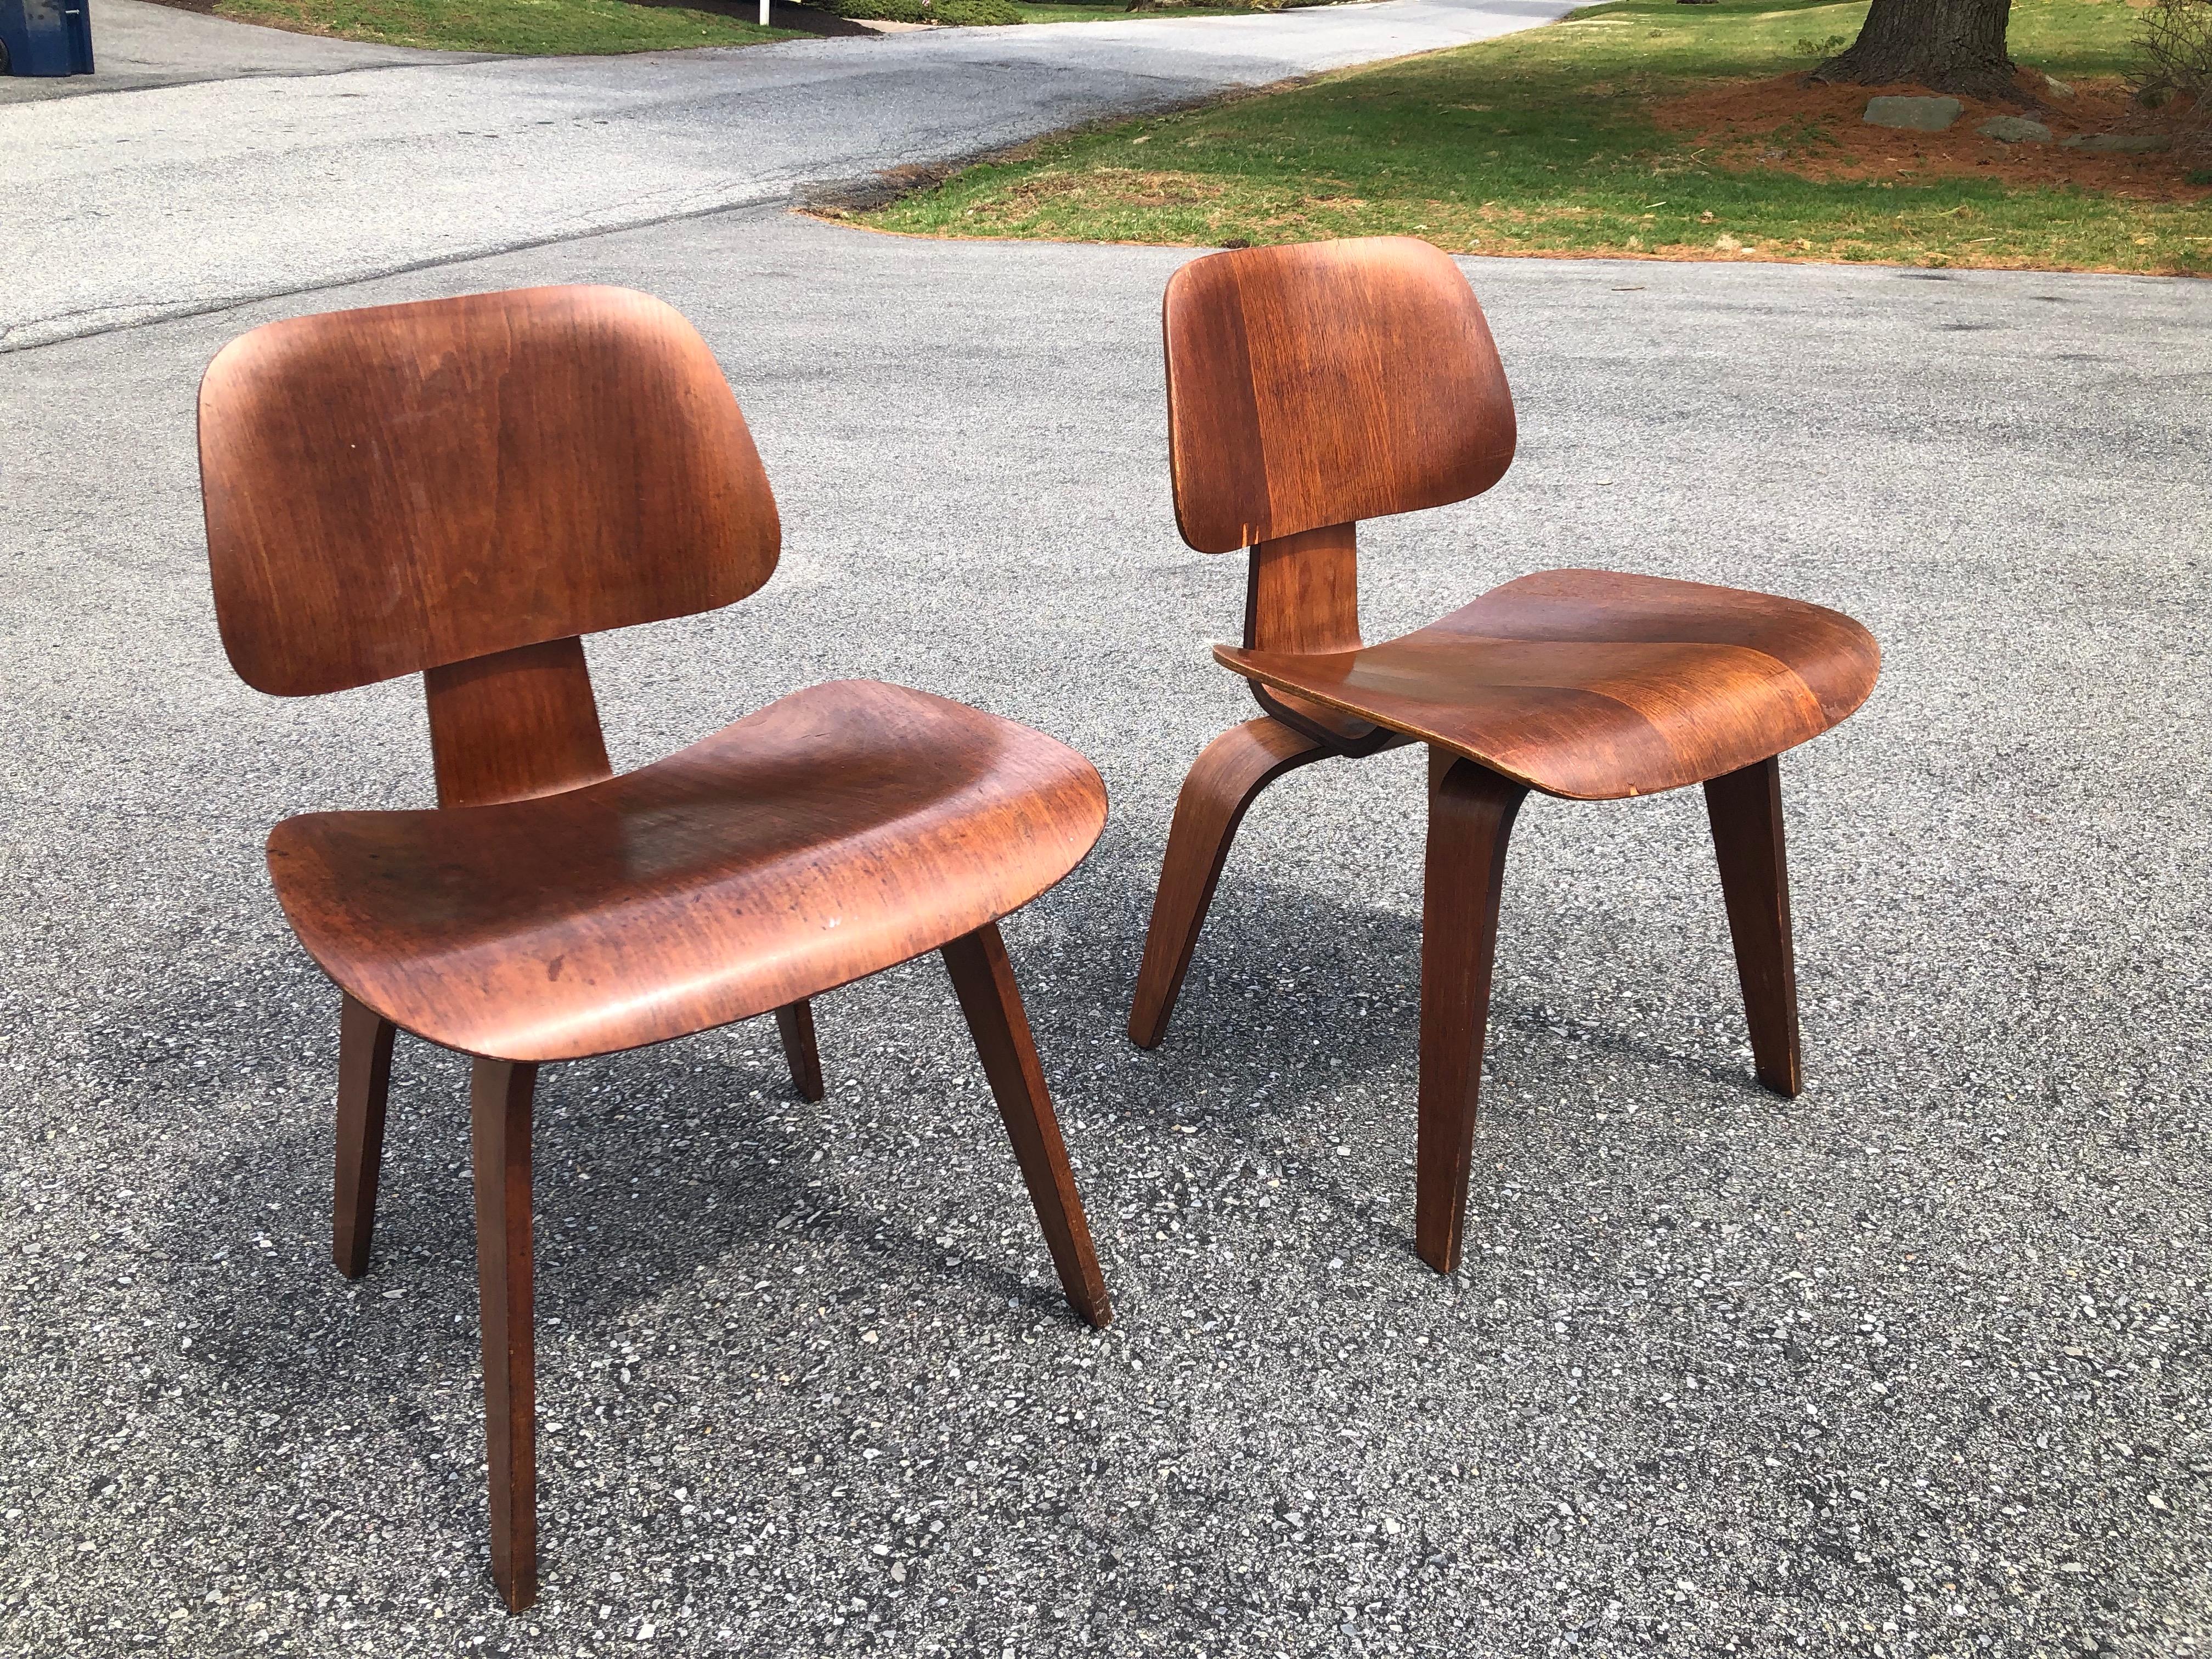 Pair very nice condition early 1950s DCM chair in walnut. All original condition. Great examples
Pair of vintage Herman Miller ‘DCW’ dining chair wood by Ray and Charles Eames in good vintage condition, circa 1950. Walnut frames with 5-2-4 bolt